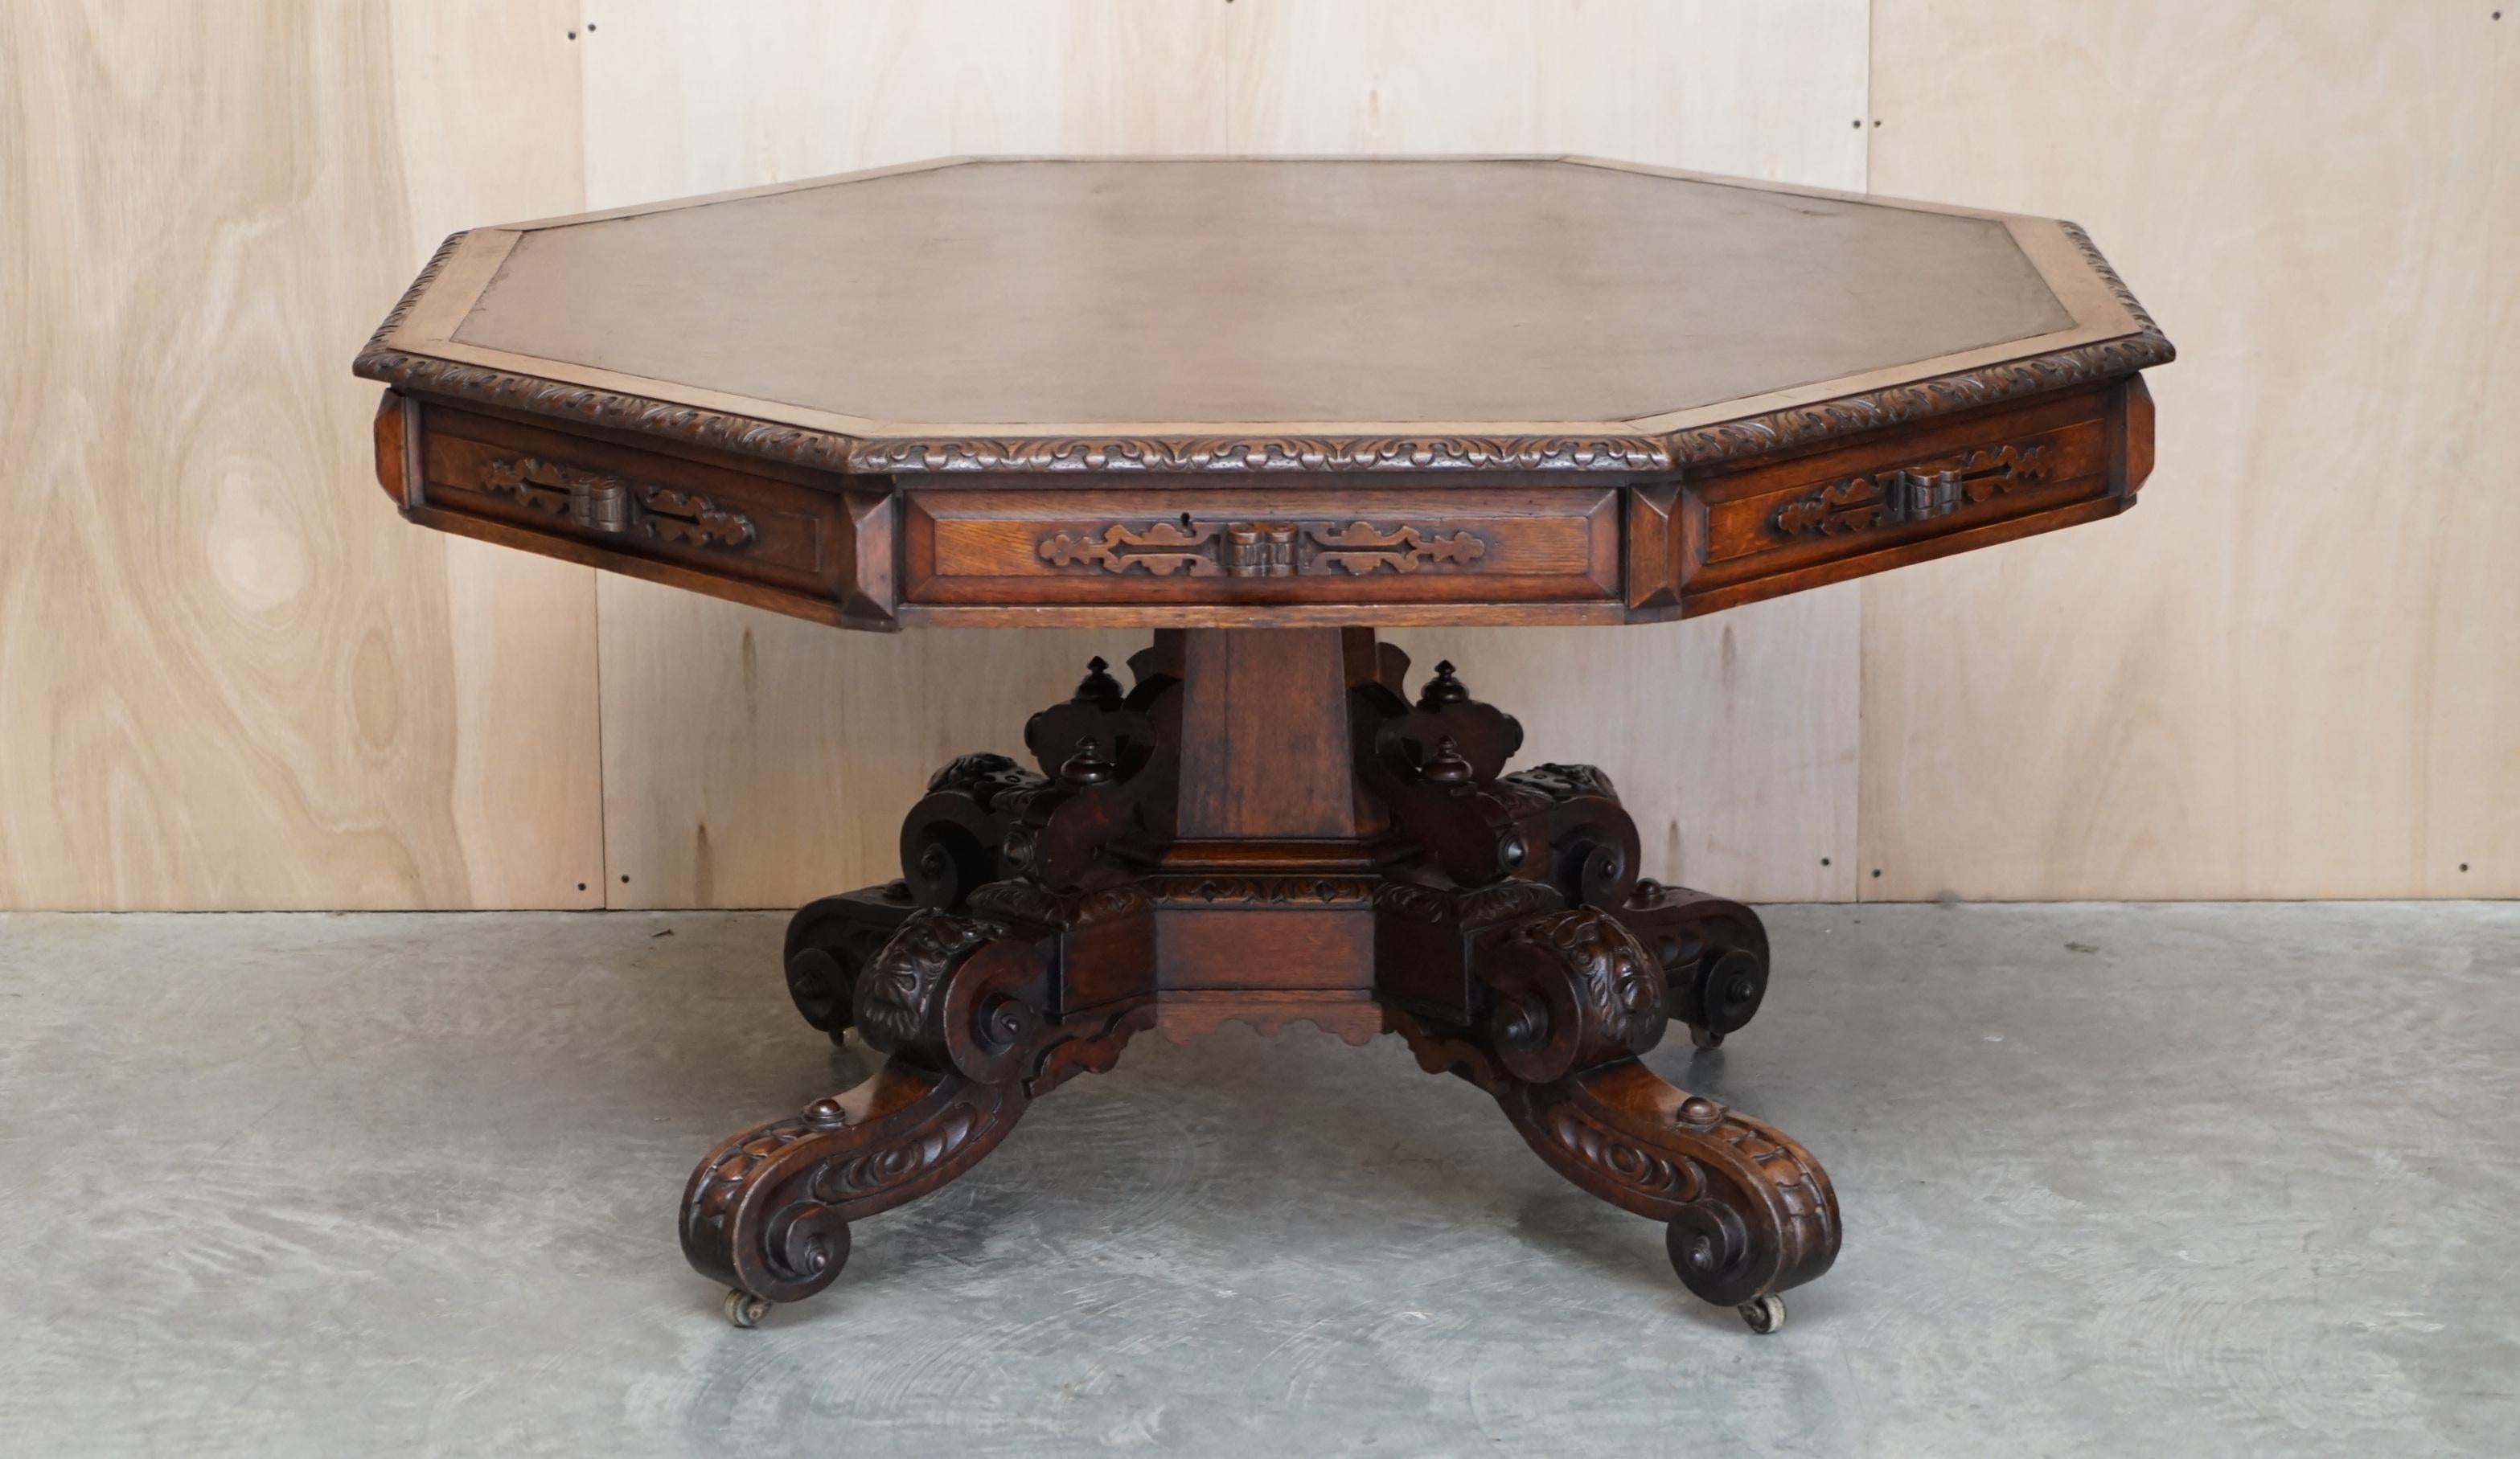 We are delighted to offer for sale this stunning Antique Gothic Revival Rent table with hand carved Lions heads

A very good looking well made and decorative Gothic Revival rent table circa 1860-1880, the table has four large drawers and an